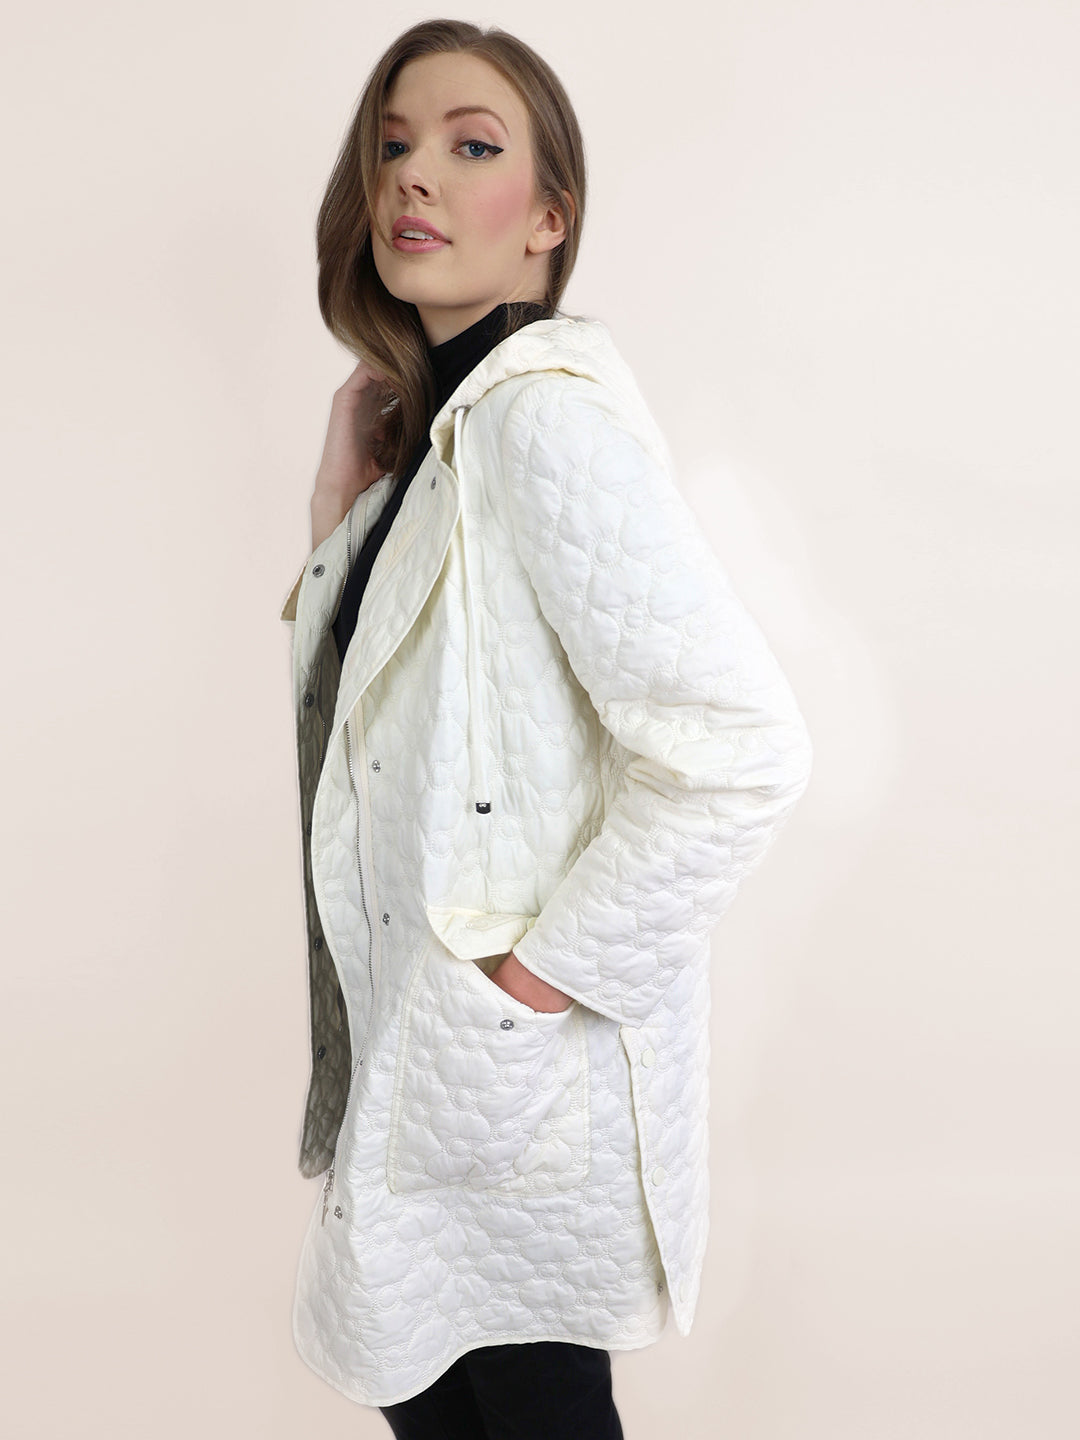 A picture of a woman with long hair posing in white coat.